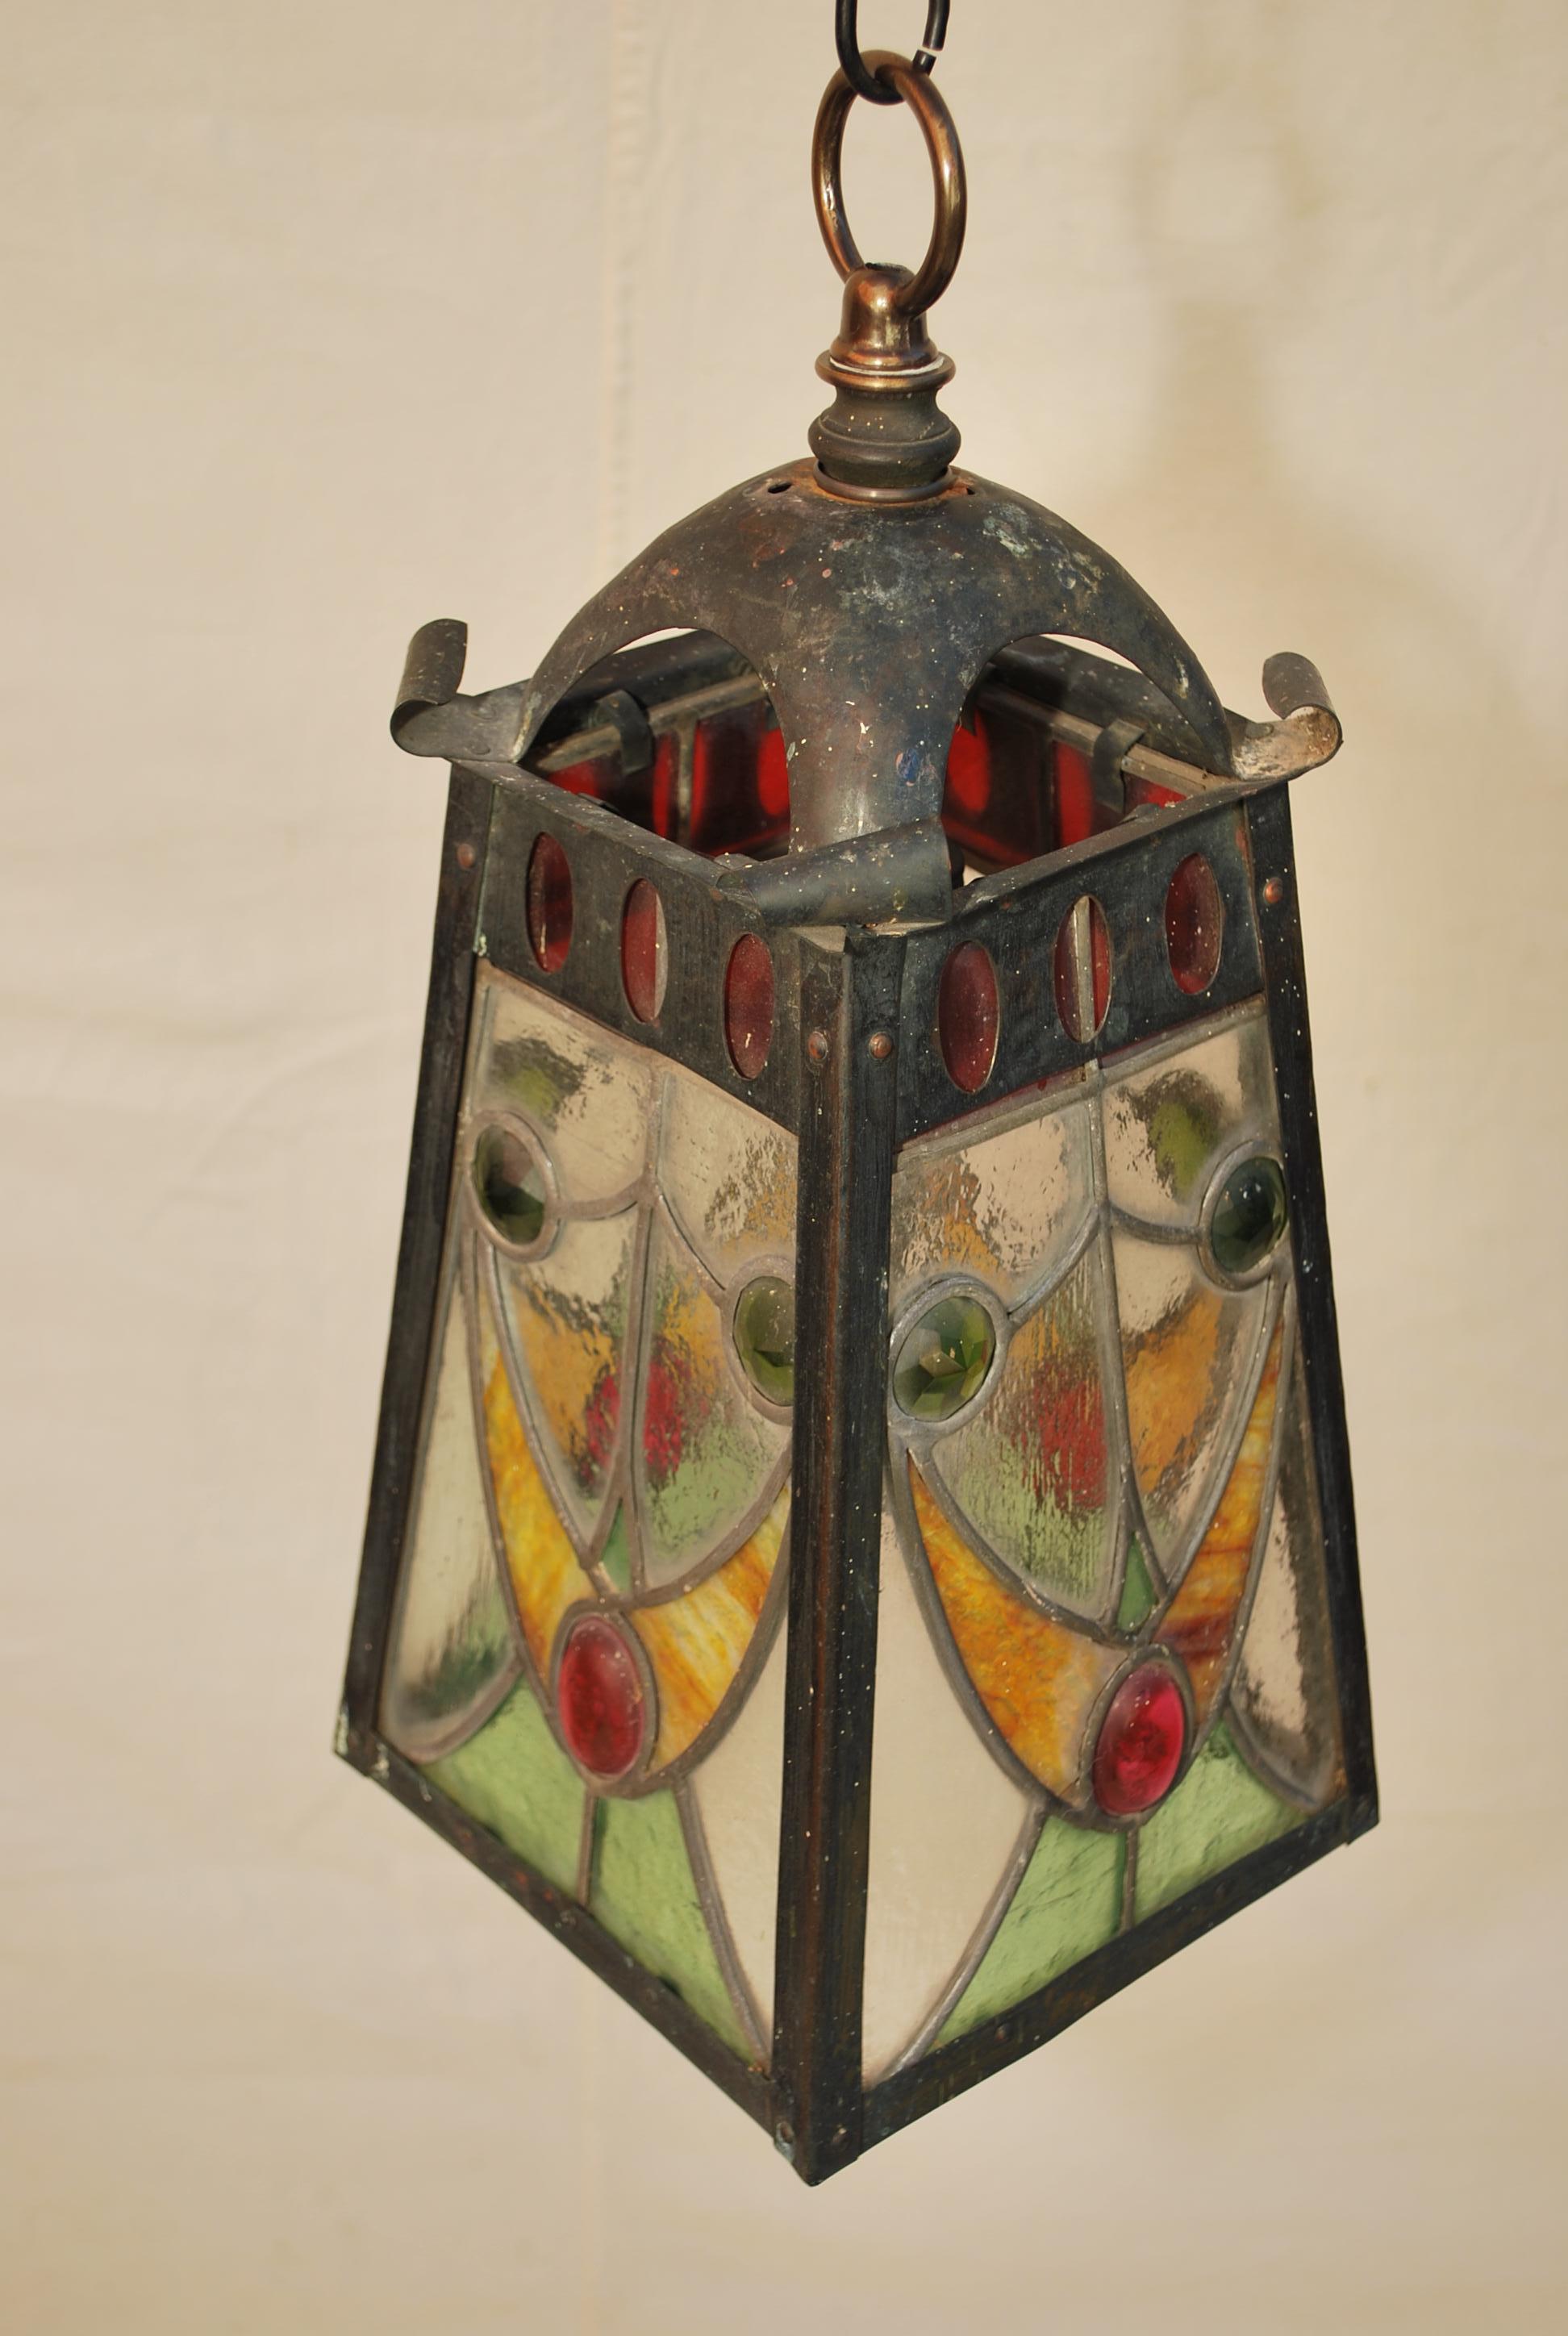 A beautiful and rare turn of the century lantern, I have never seen such whimsical light, 